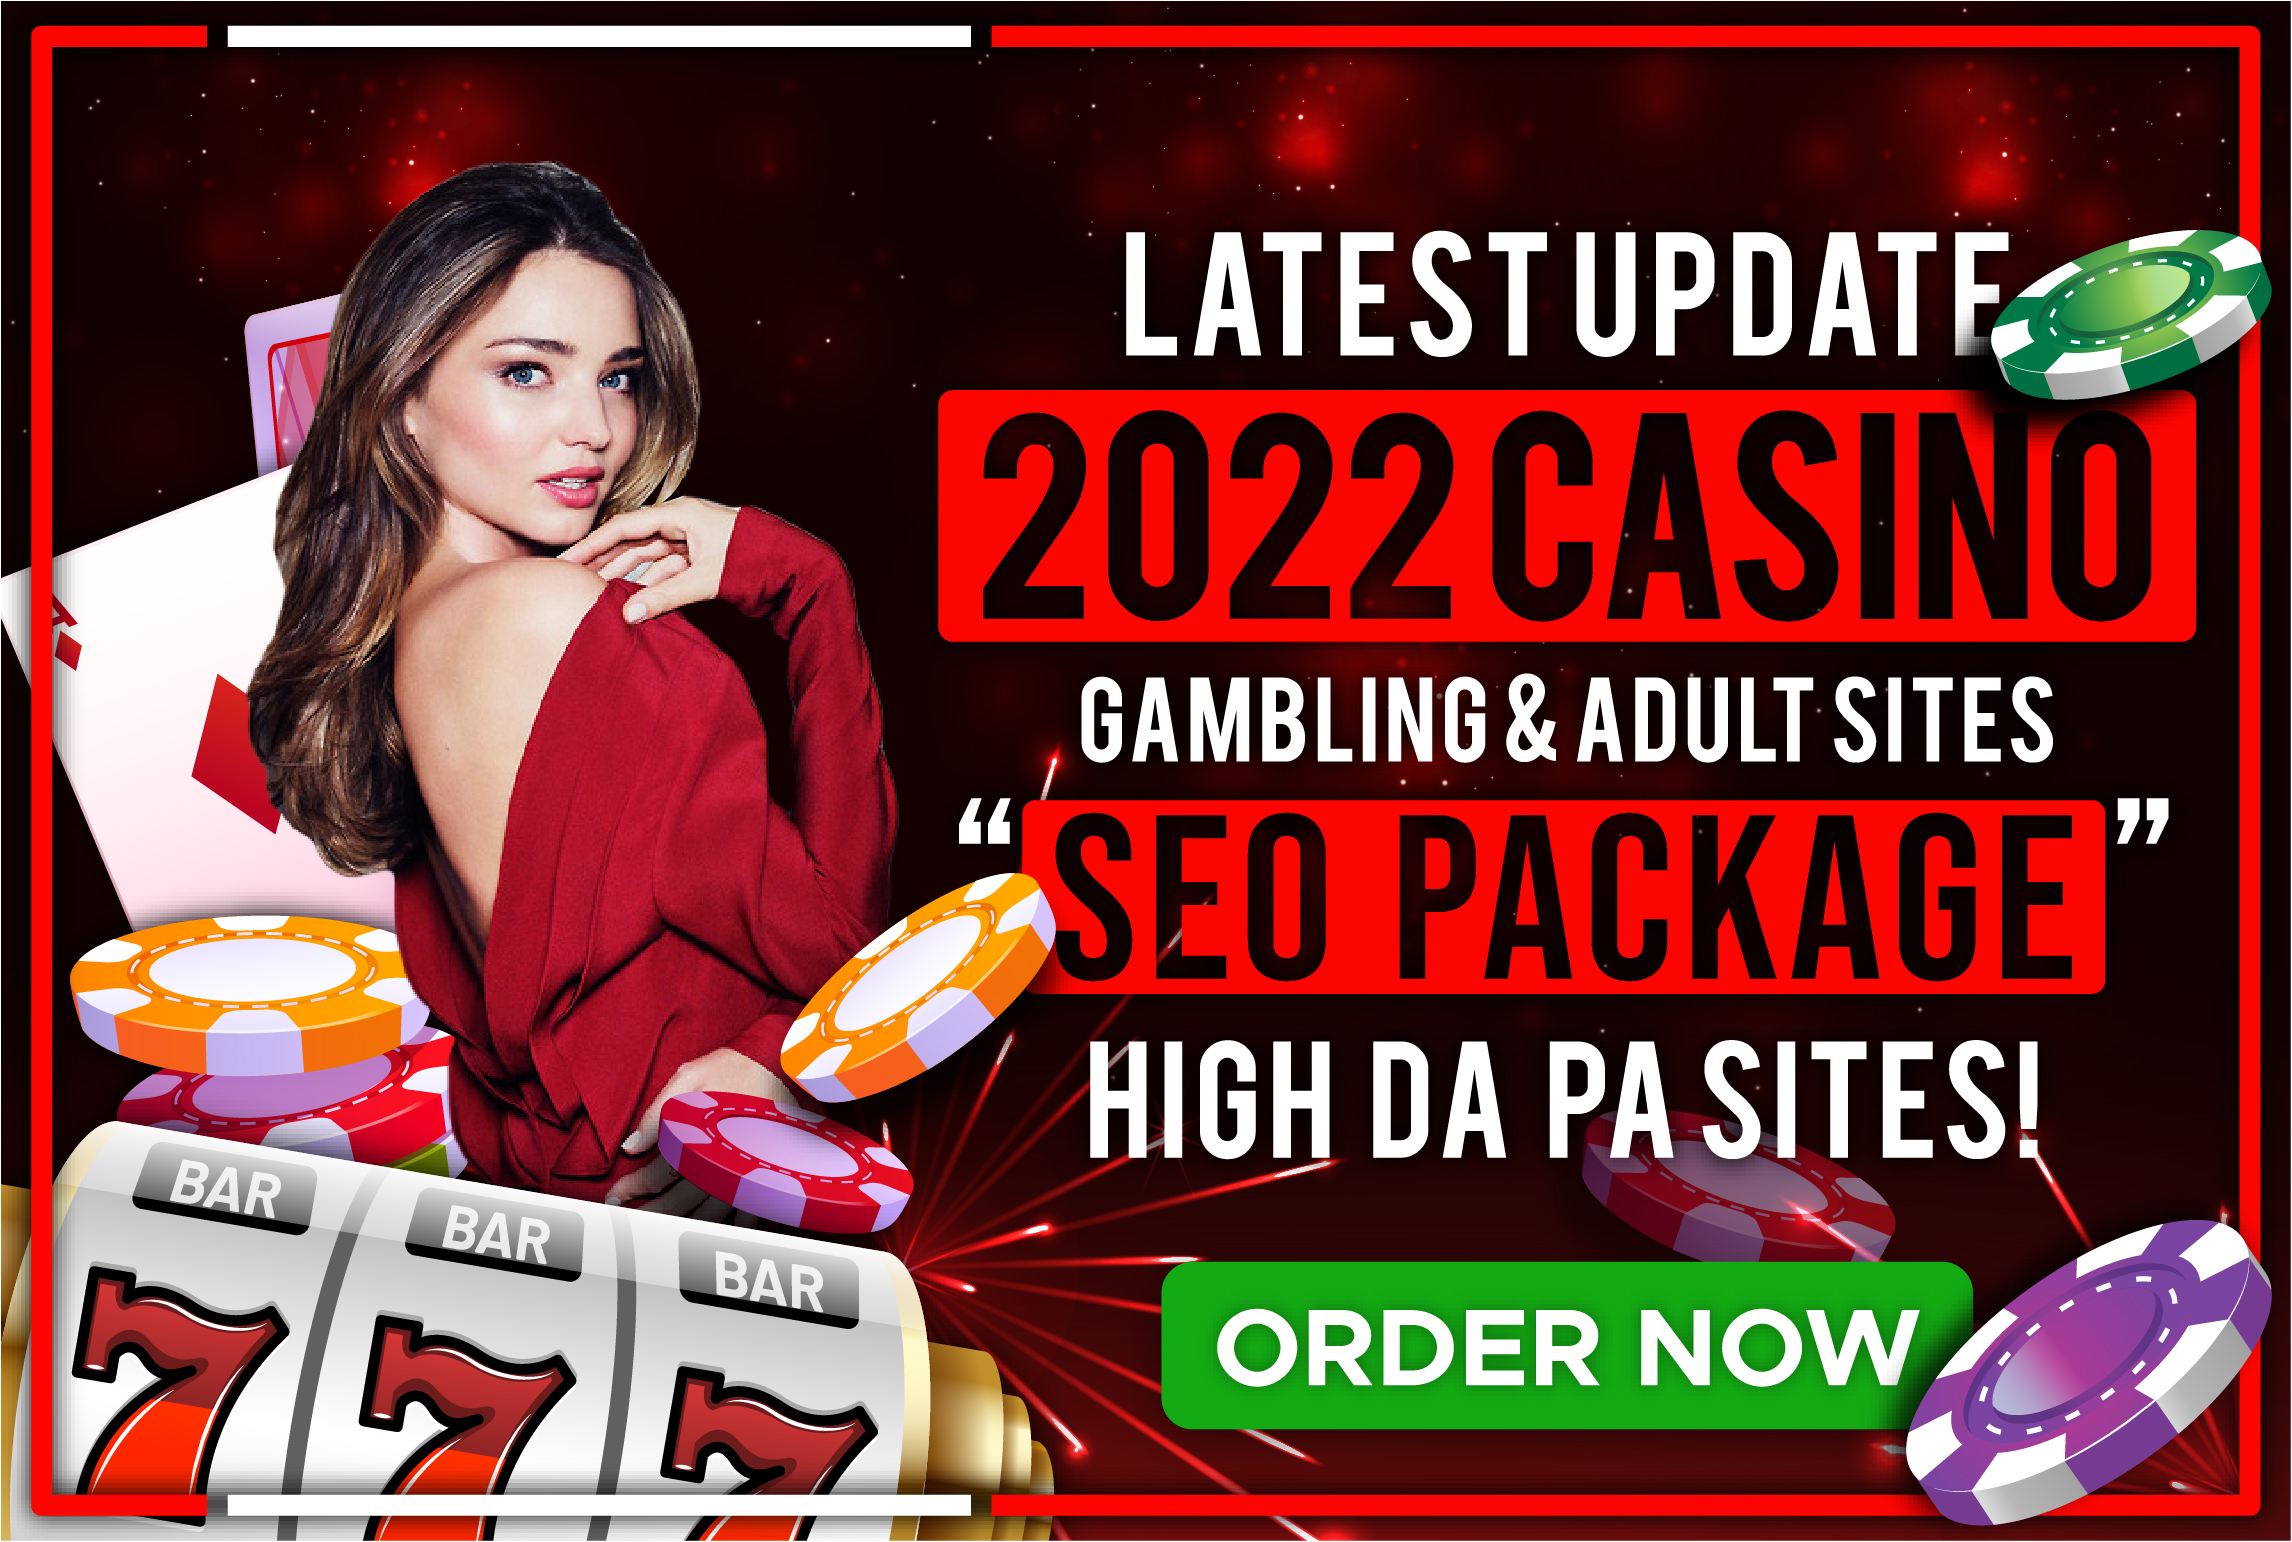 Latest Update 2022 CASINO/GAMBLING/ADULT Sites SEO Package - RANK 1st Page